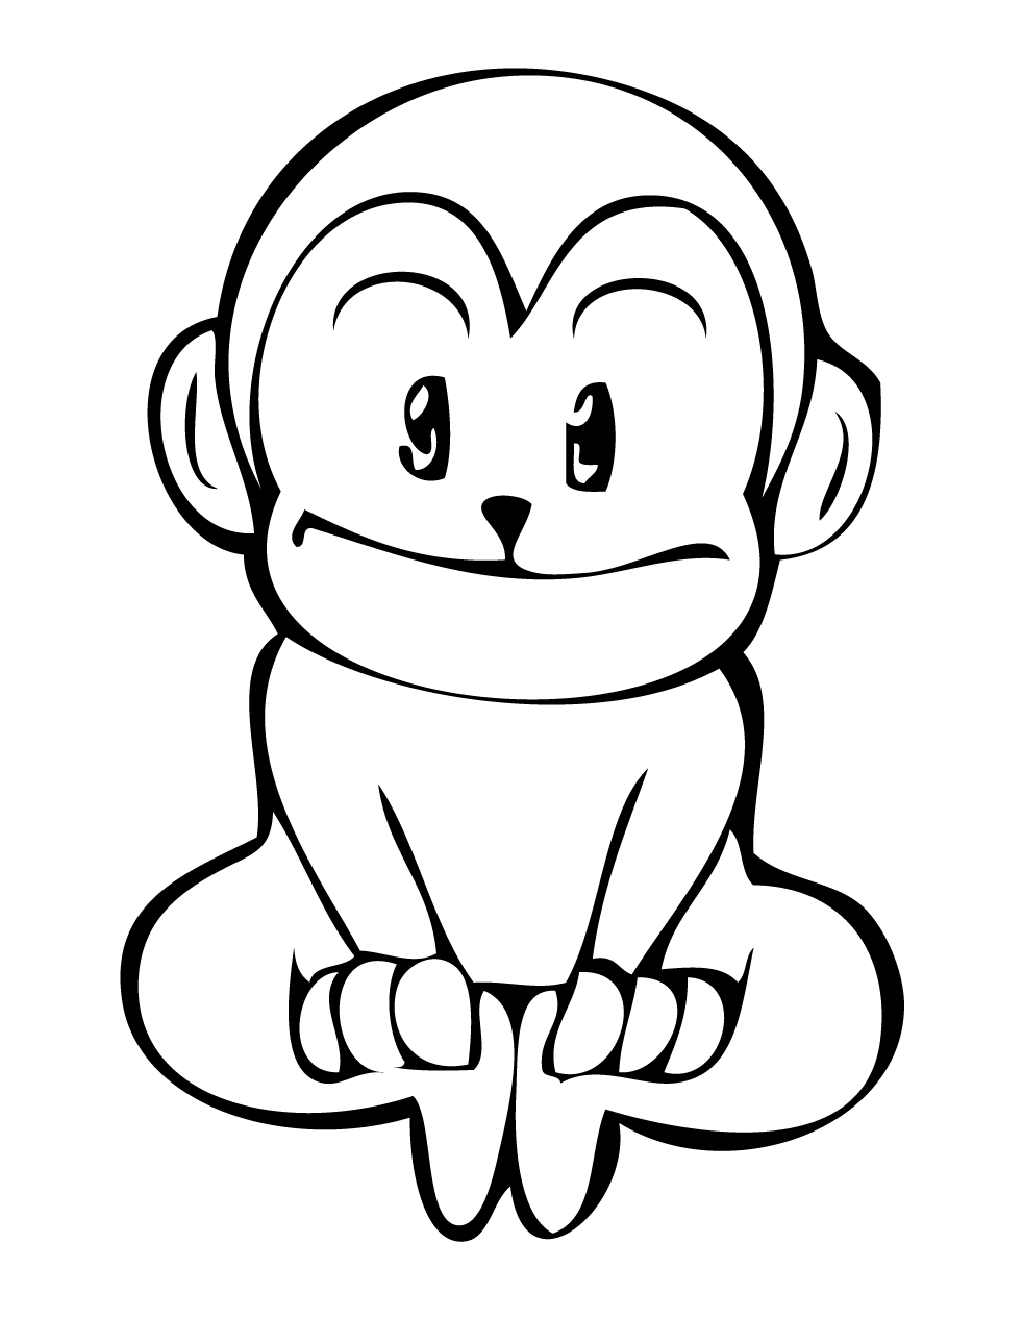 Monkey to color